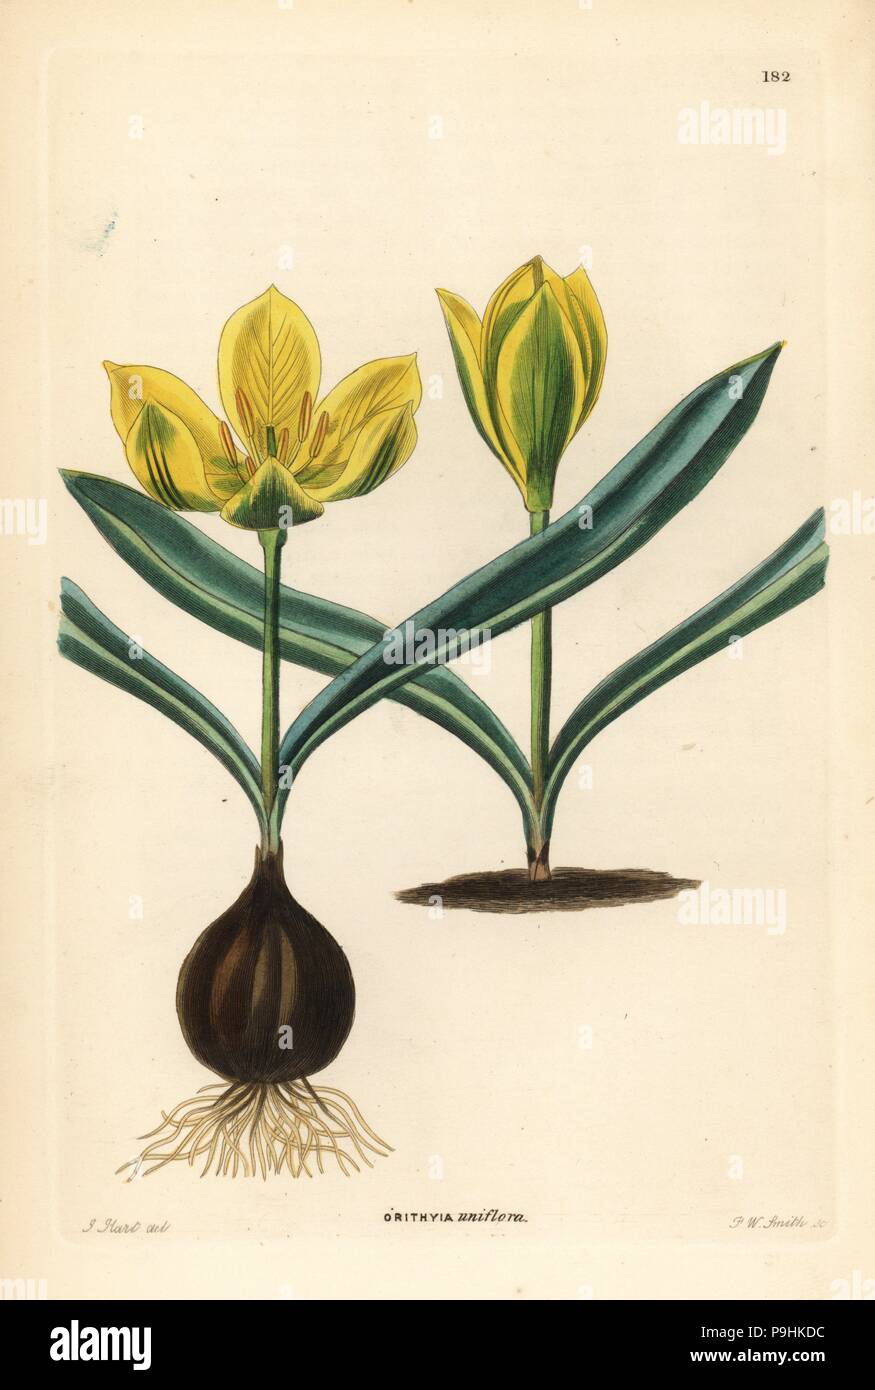 Single-flowered tulip, Tulipa uniflora (Single-flowered orithyia, Orithyia uniflora). Handcoloured copperplate engraving by Frederick W. Smith after J. Hart from John Lindley and Robert Sweet's Ornamental Flower Garden and Shrubbery, G. Willis, London, 1854. Stock Photo